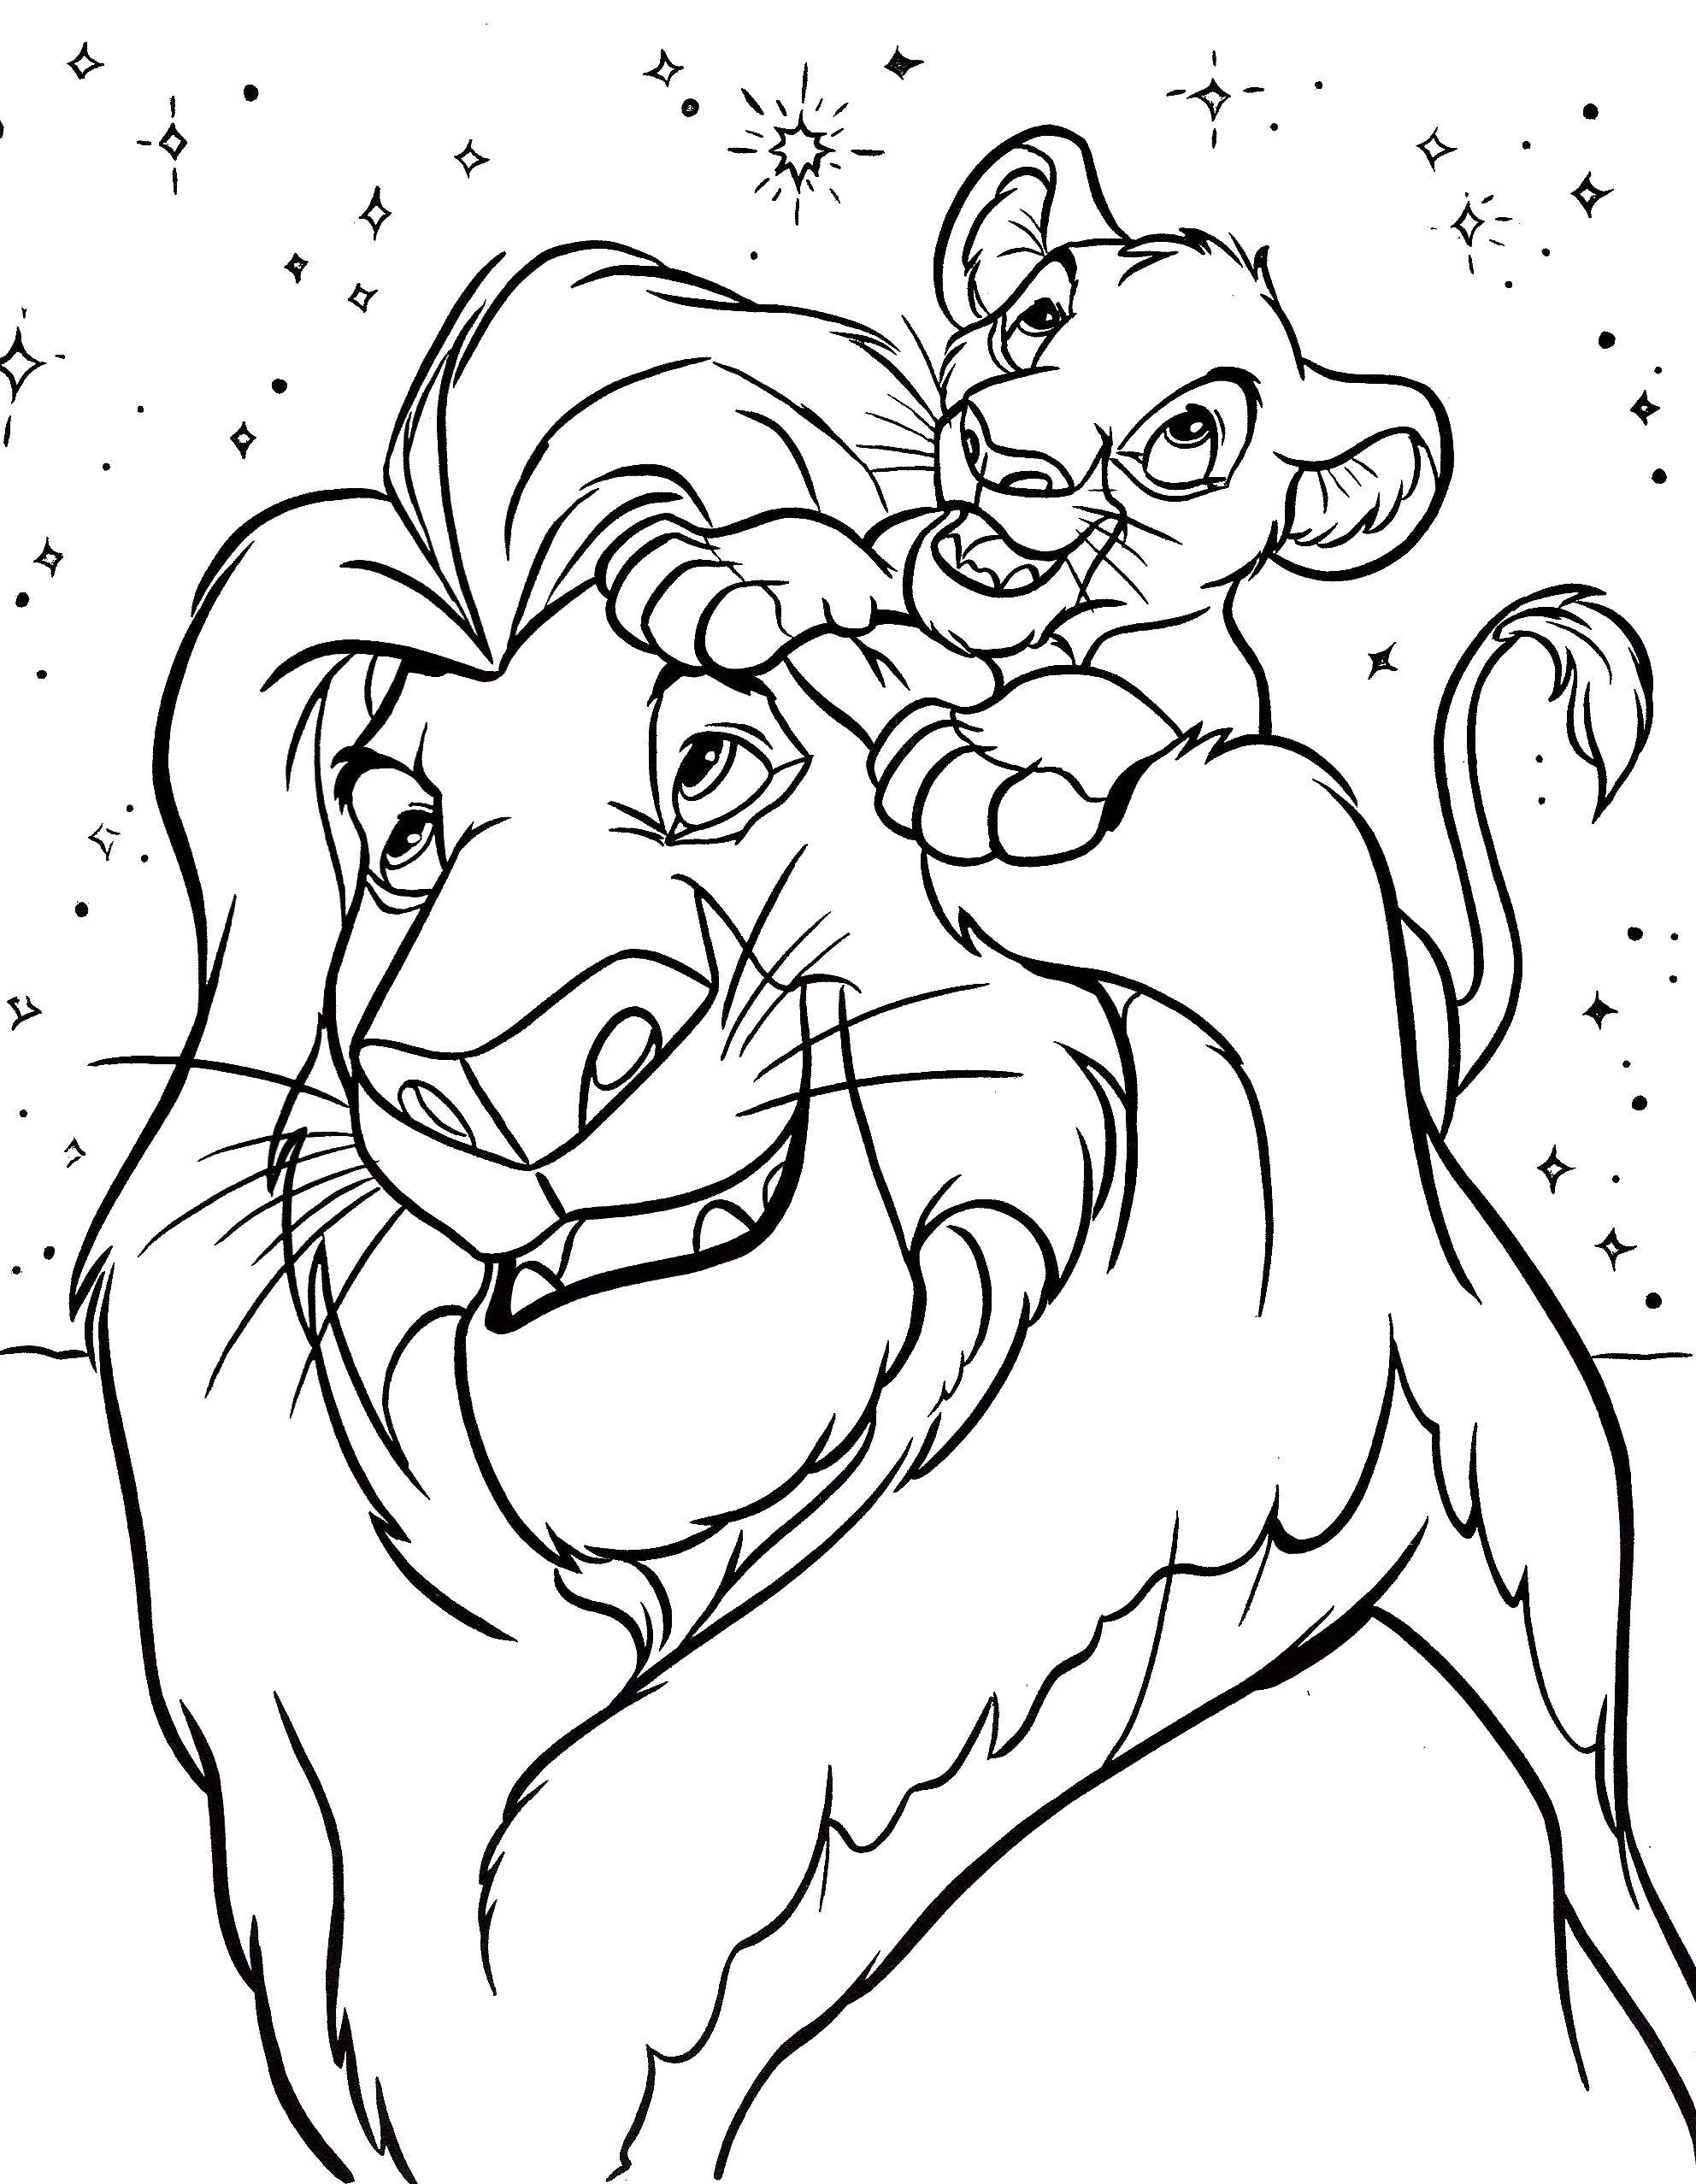 Coloring Simba and Leo. Category Disney coloring pages. Tags:  the lion, Simba, the lion cub.